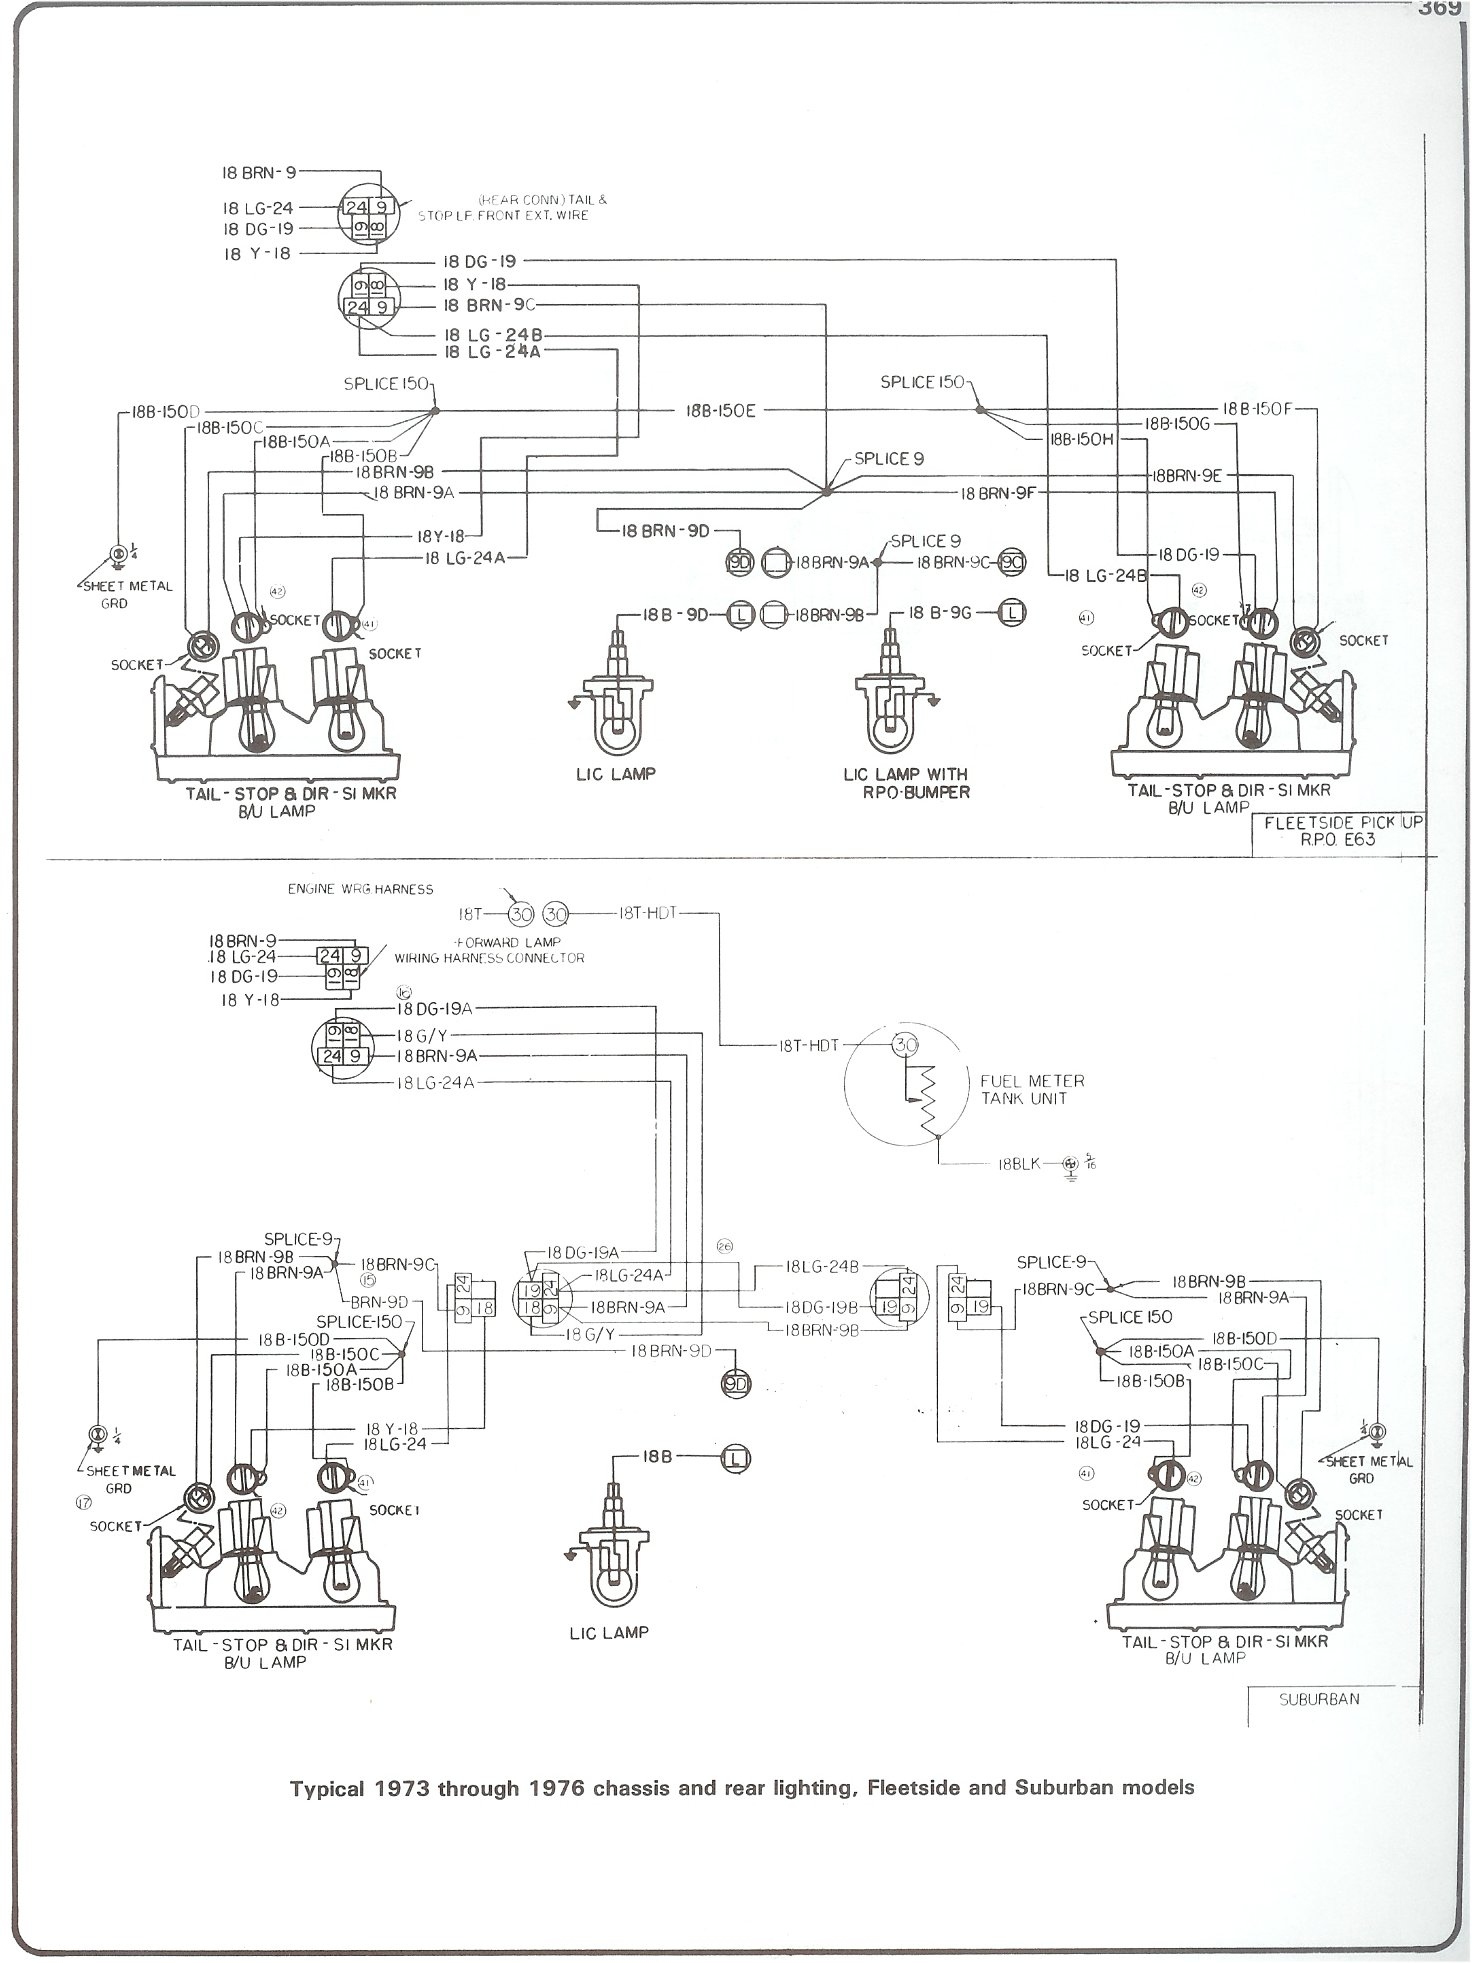 Complete 73-87 Wiring Diagrams - 87 Chevy Truck Wiring Diagram